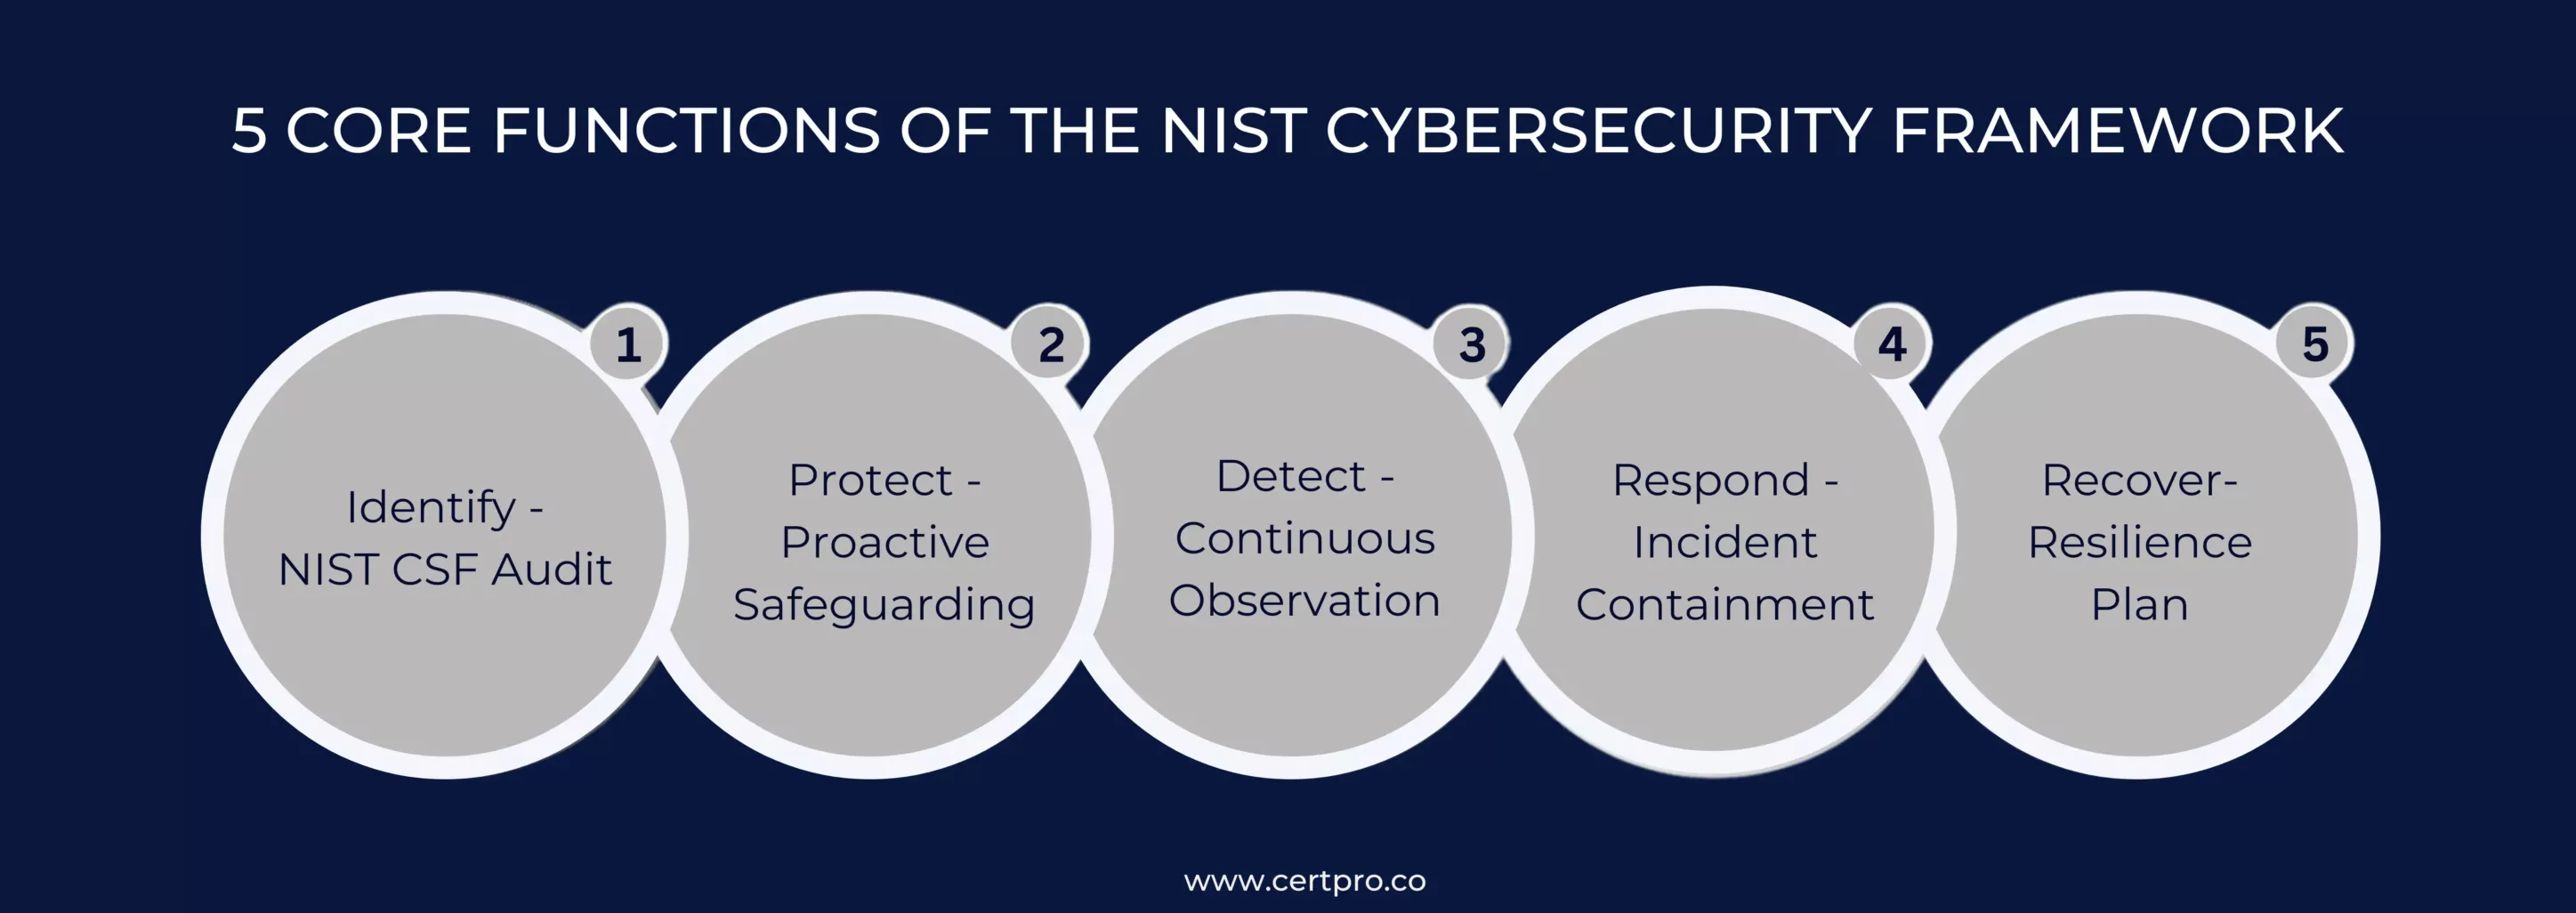 5 CORE FUNCTIONS OF THE NIST CYBERSECURITY FRAMEWORK